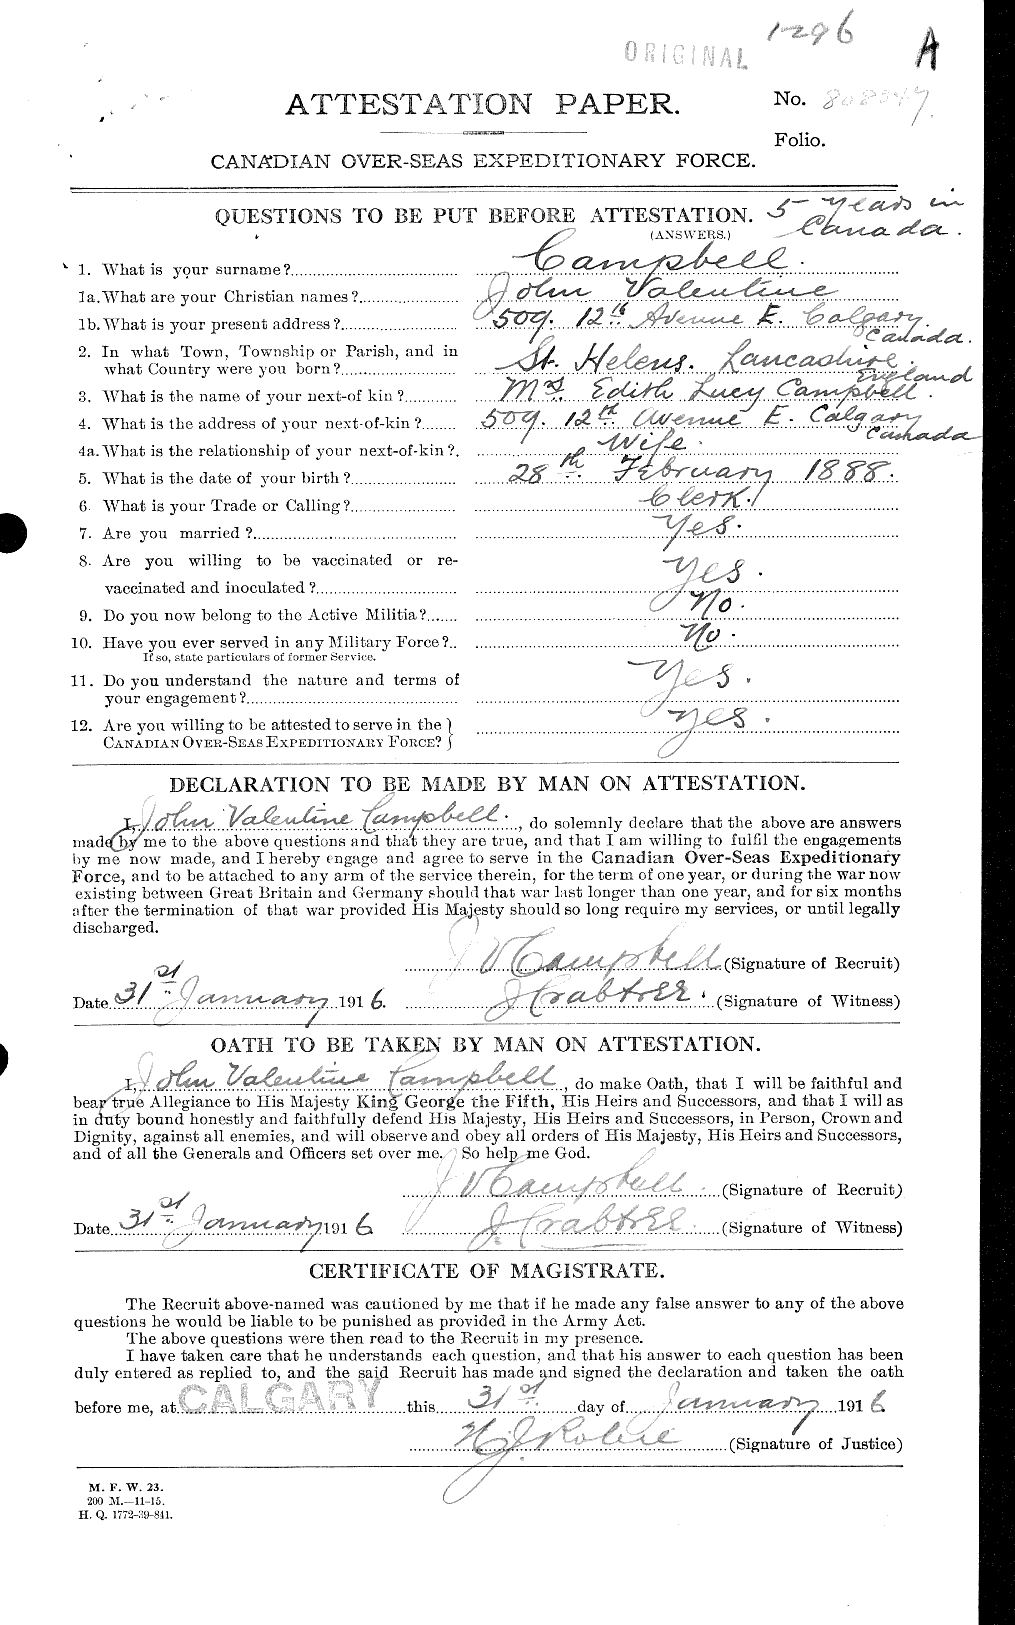 Personnel Records of the First World War - CEF 003797a